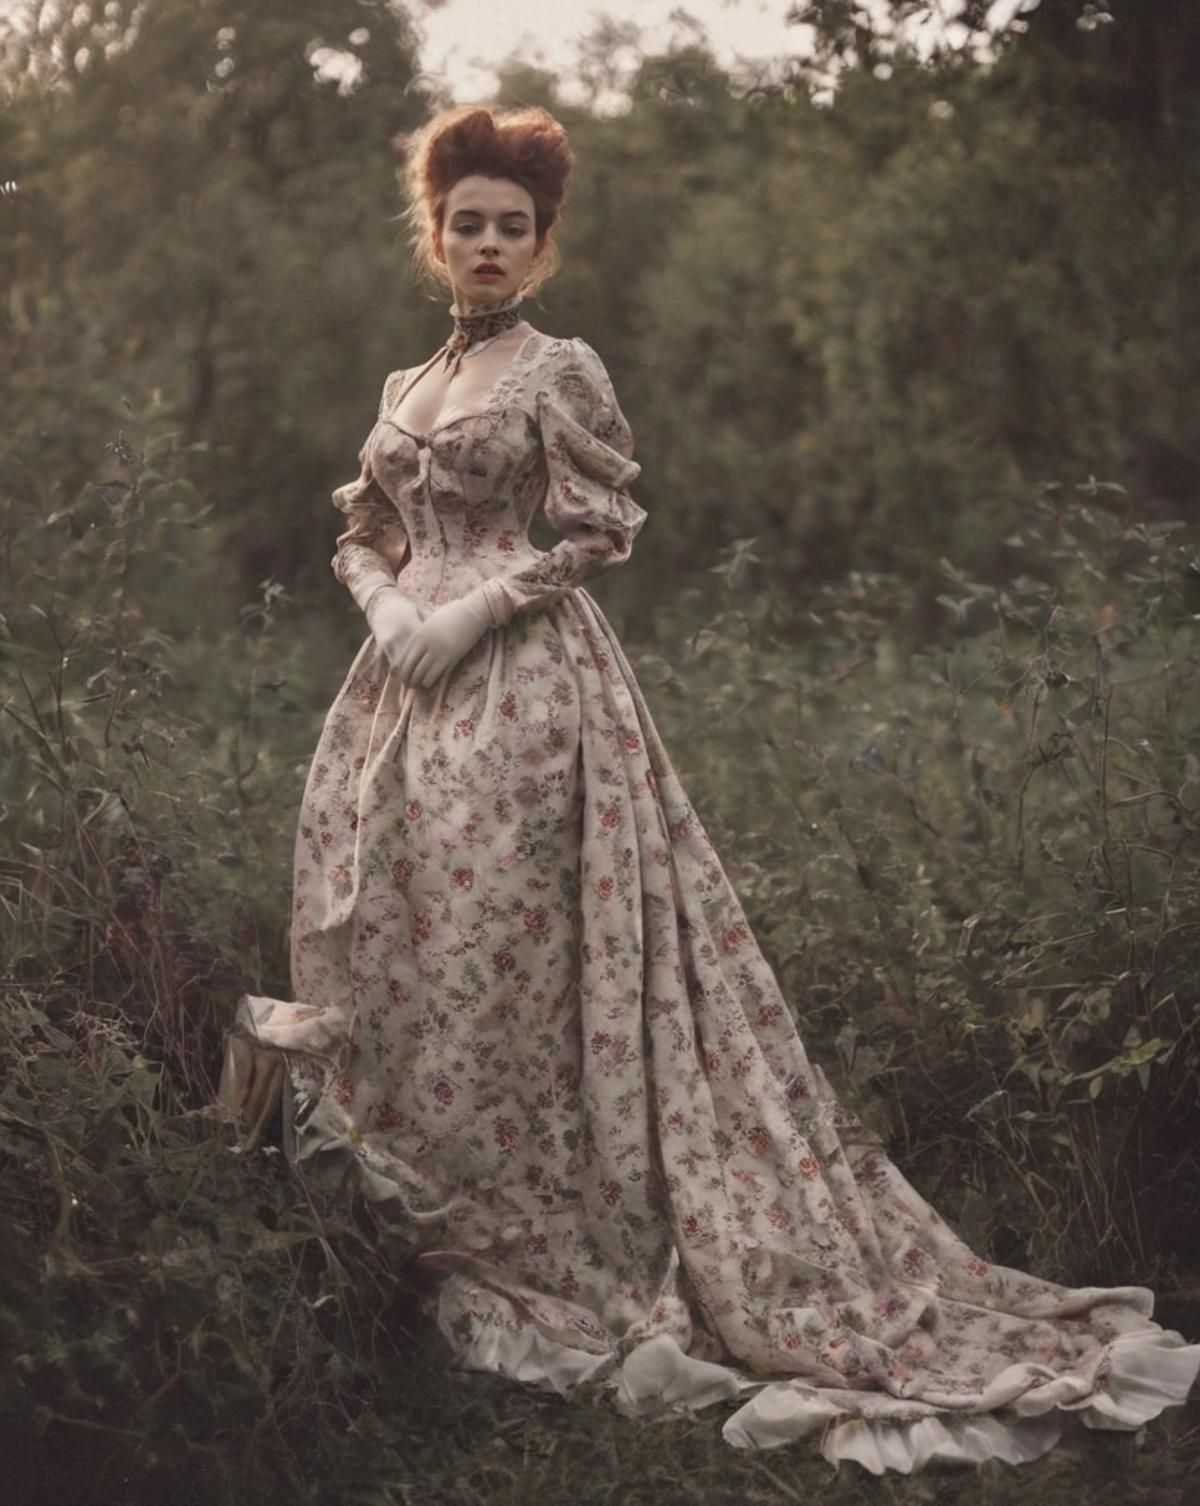 A Victorian woman wearing a lace and floral dress standing in a field.